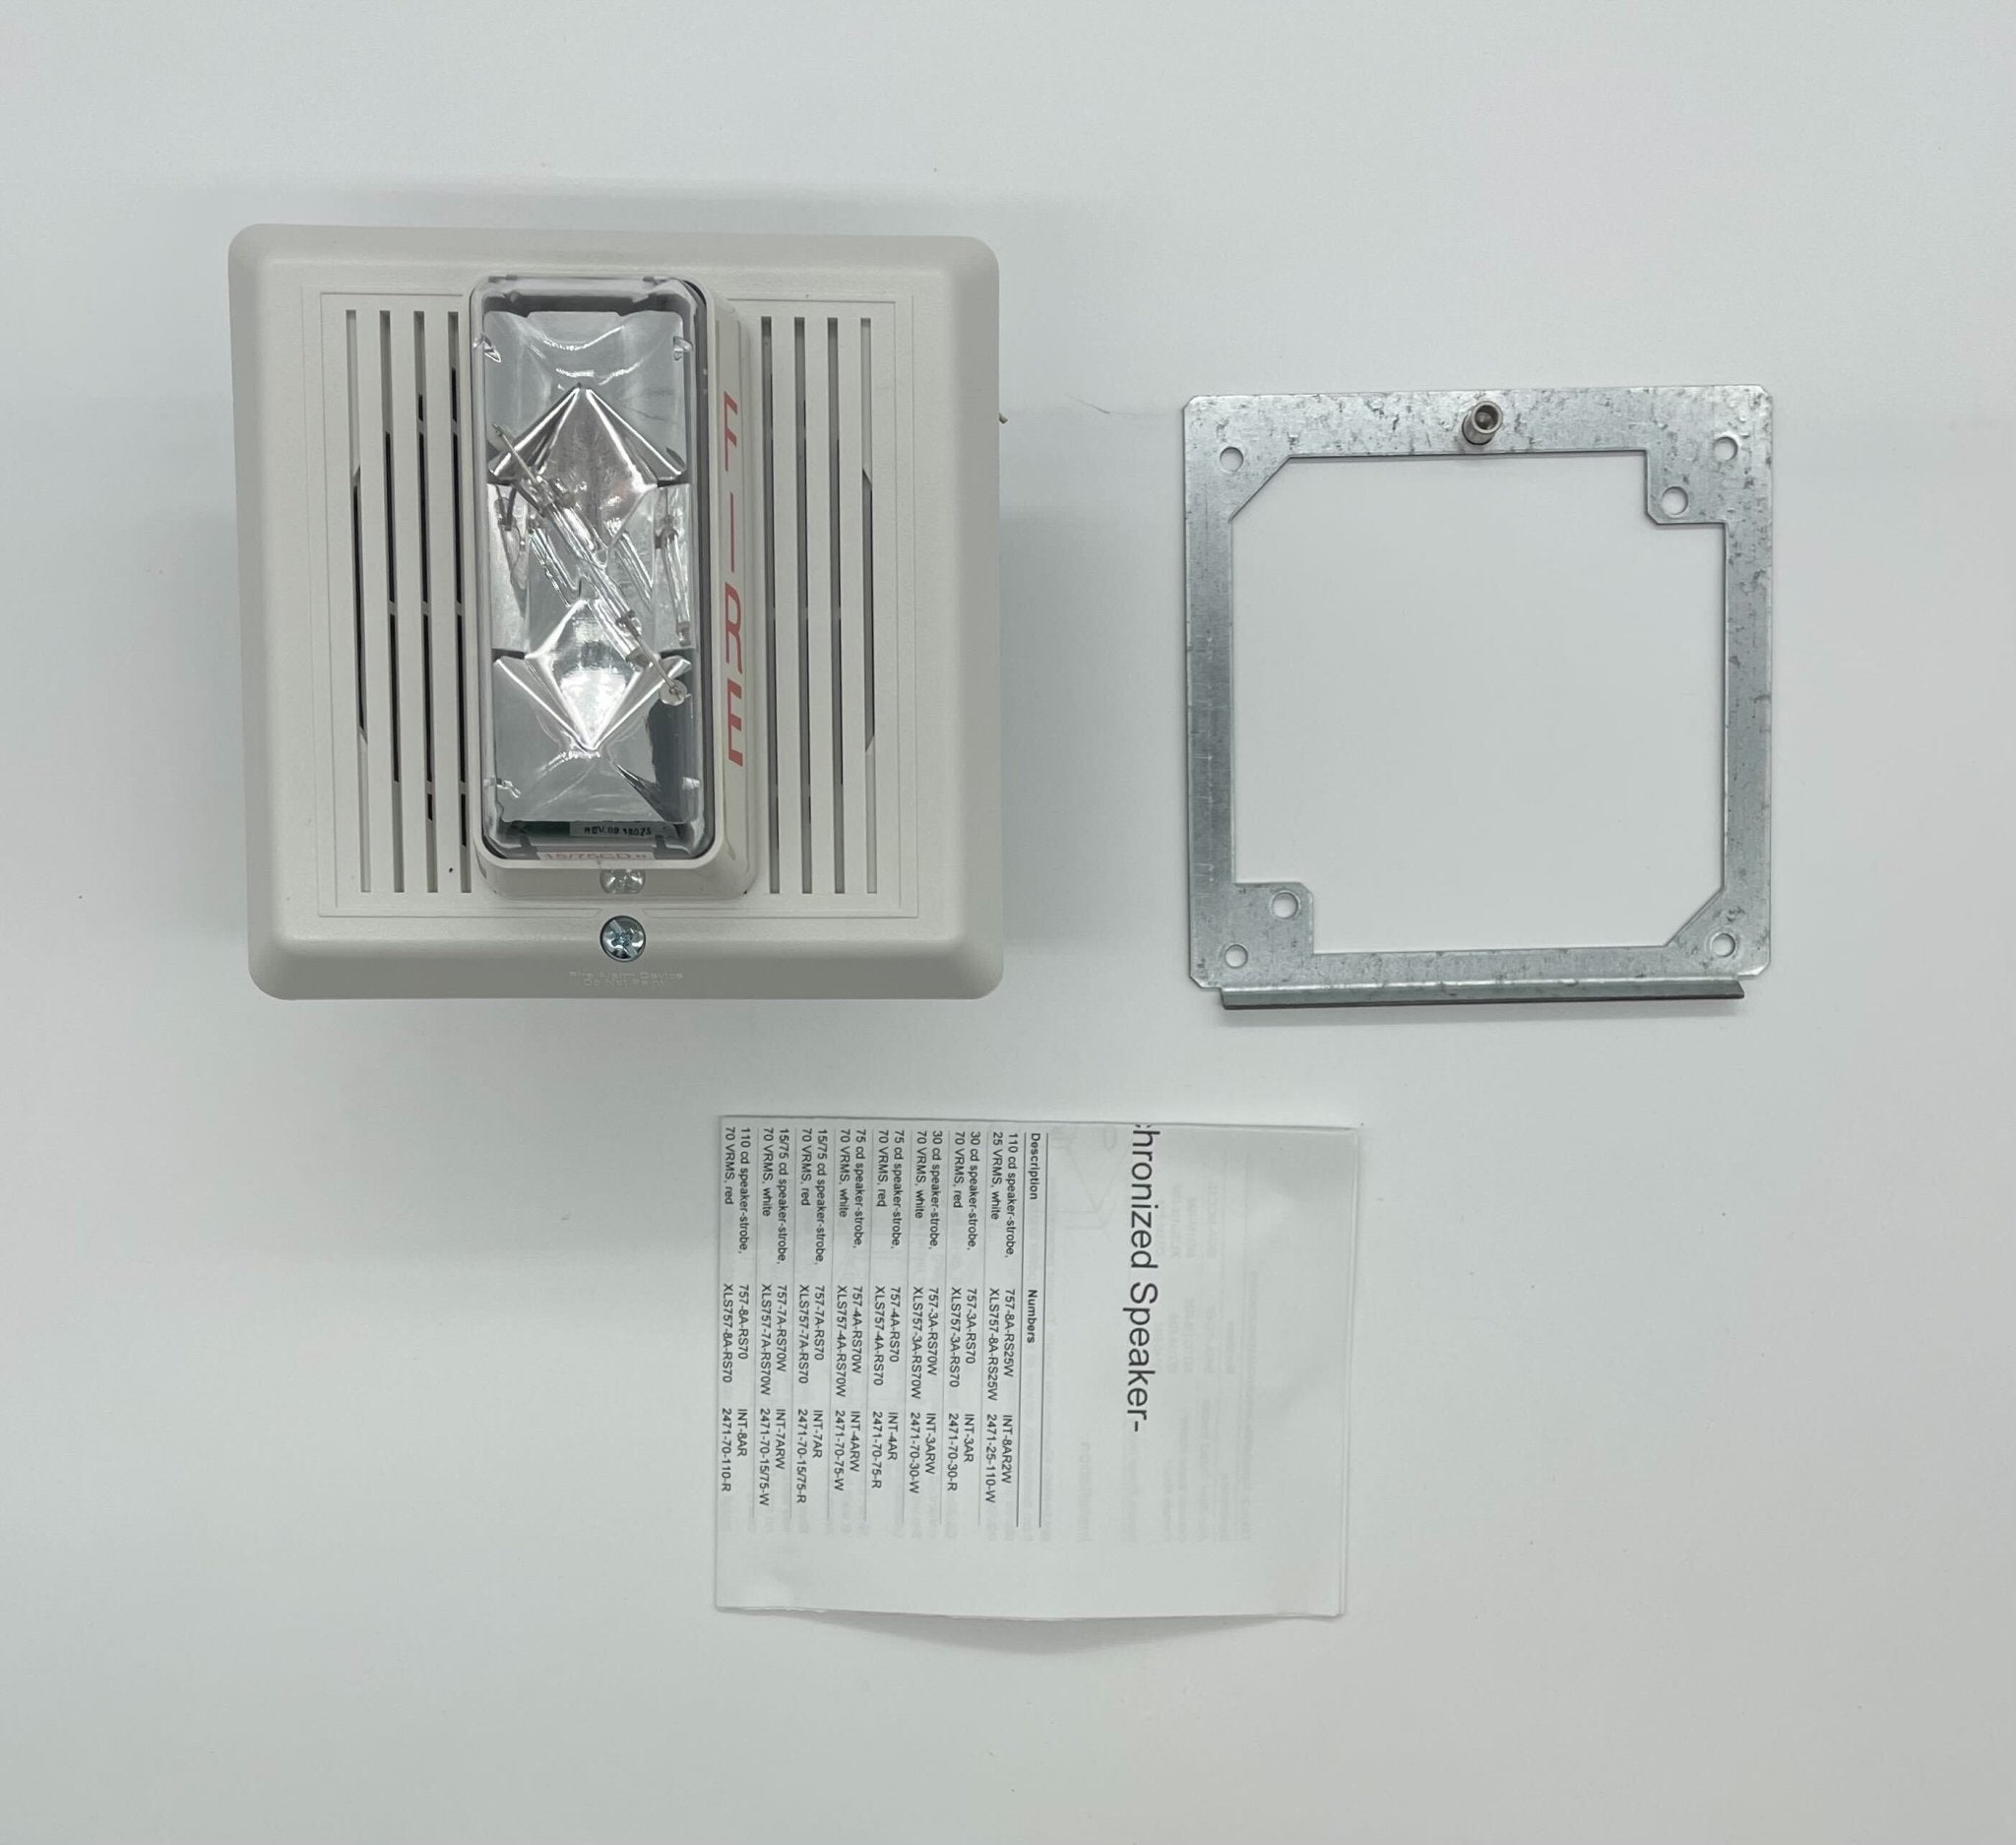 Edwards 757-7A-RS70W - The Fire Alarm Supplier